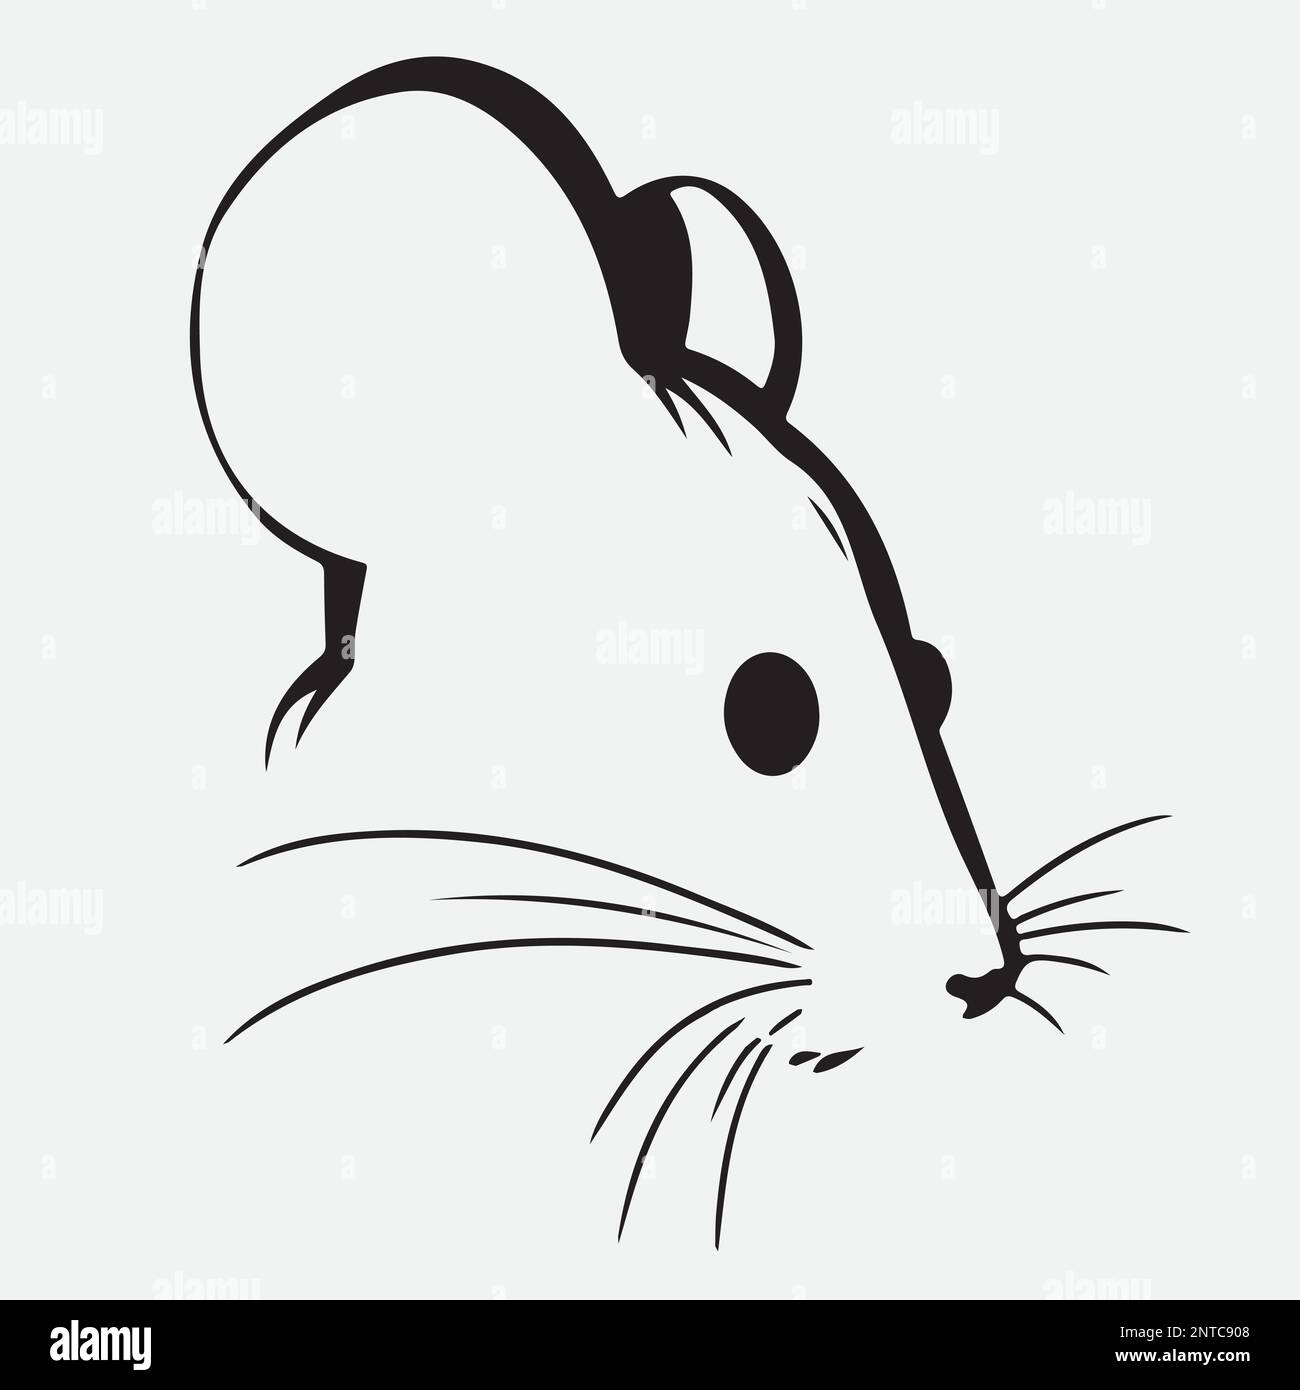 Mouse in linear style, black on a white background.  Stock Vector